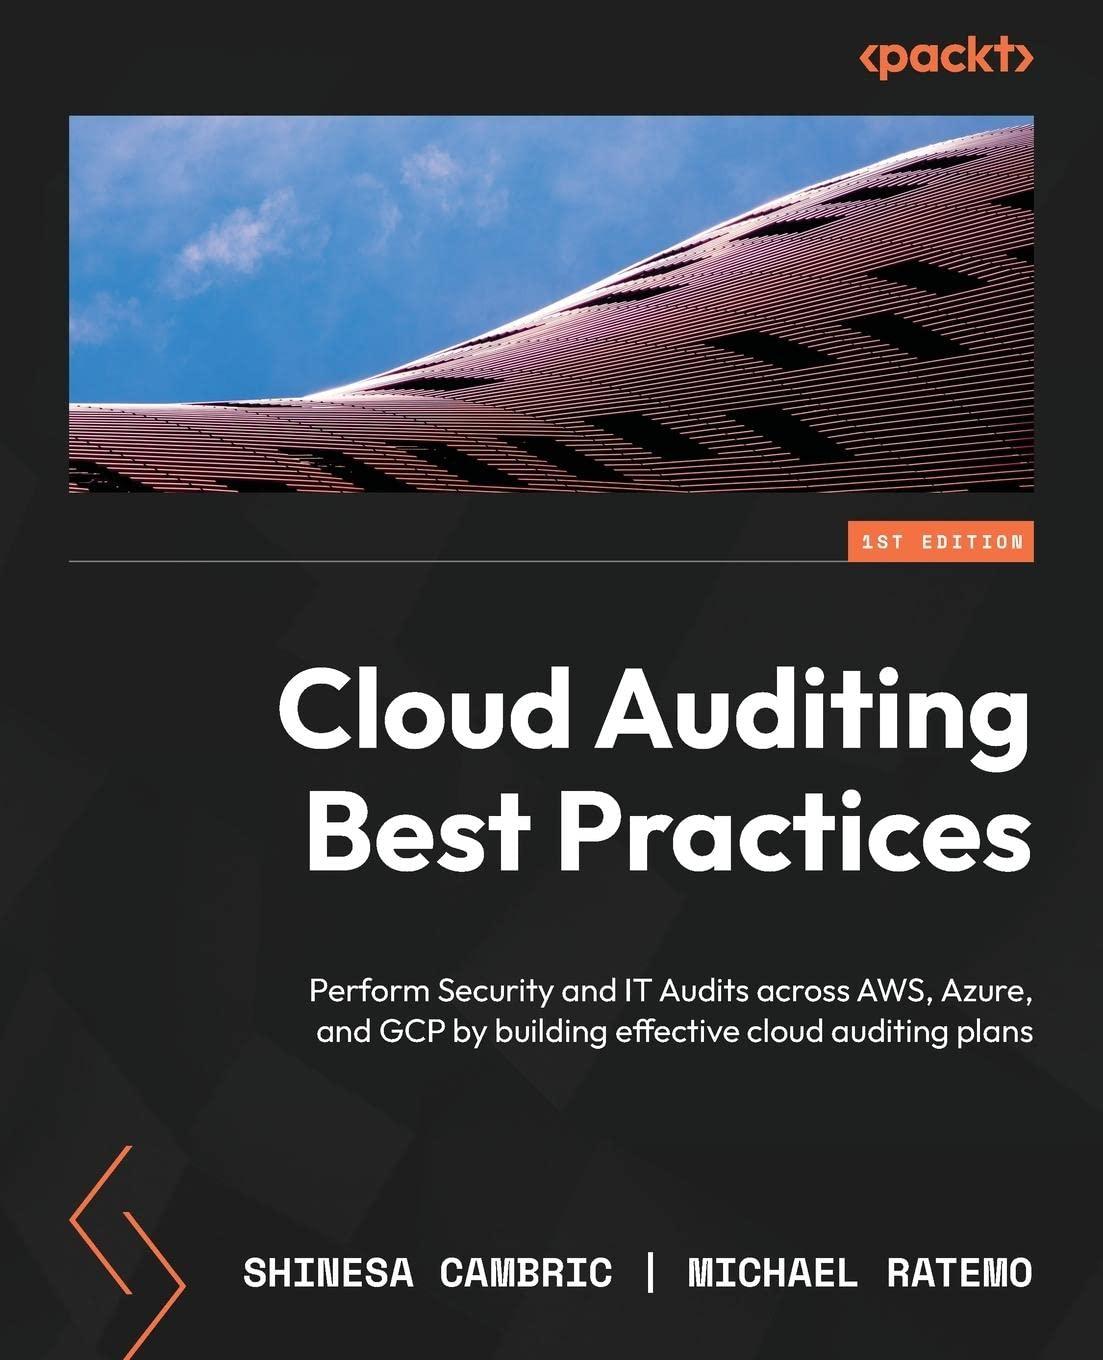 cloud auditing best practices perform security and it audits across aws azure and gcp by building effective